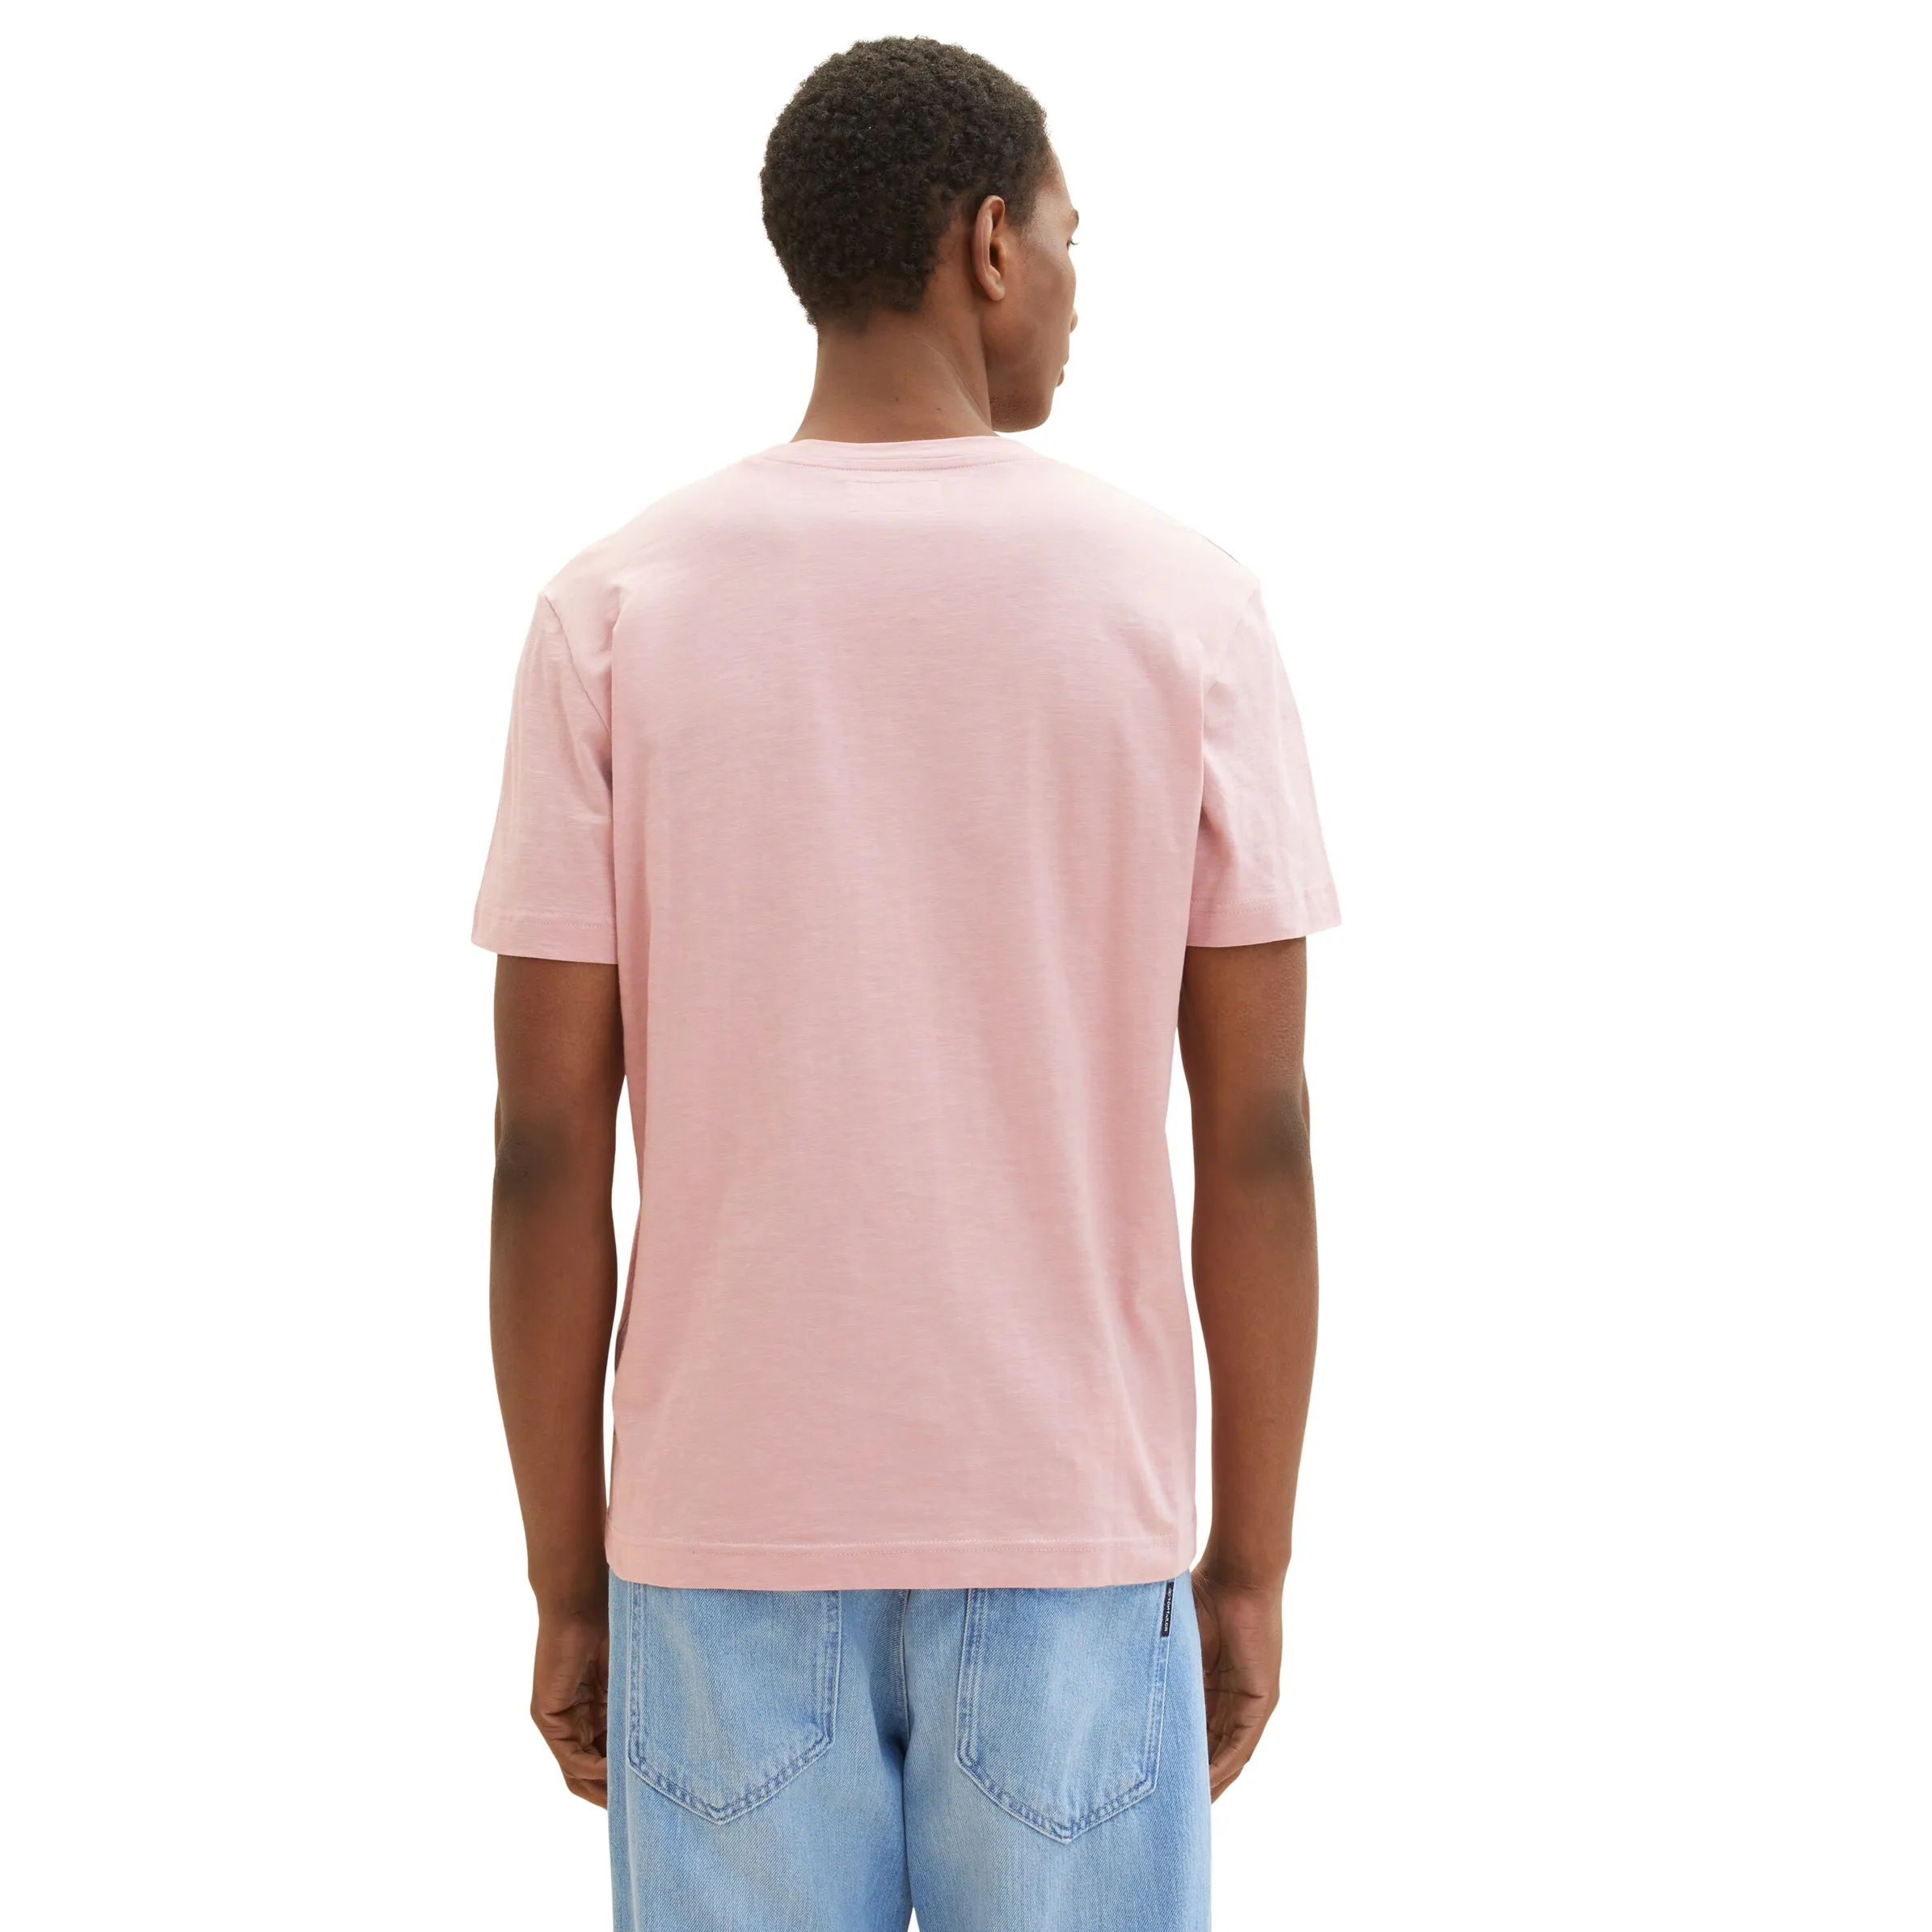 Tom Tailor 1036371 structured t-shirt with pocket Pink 880571 11055 2